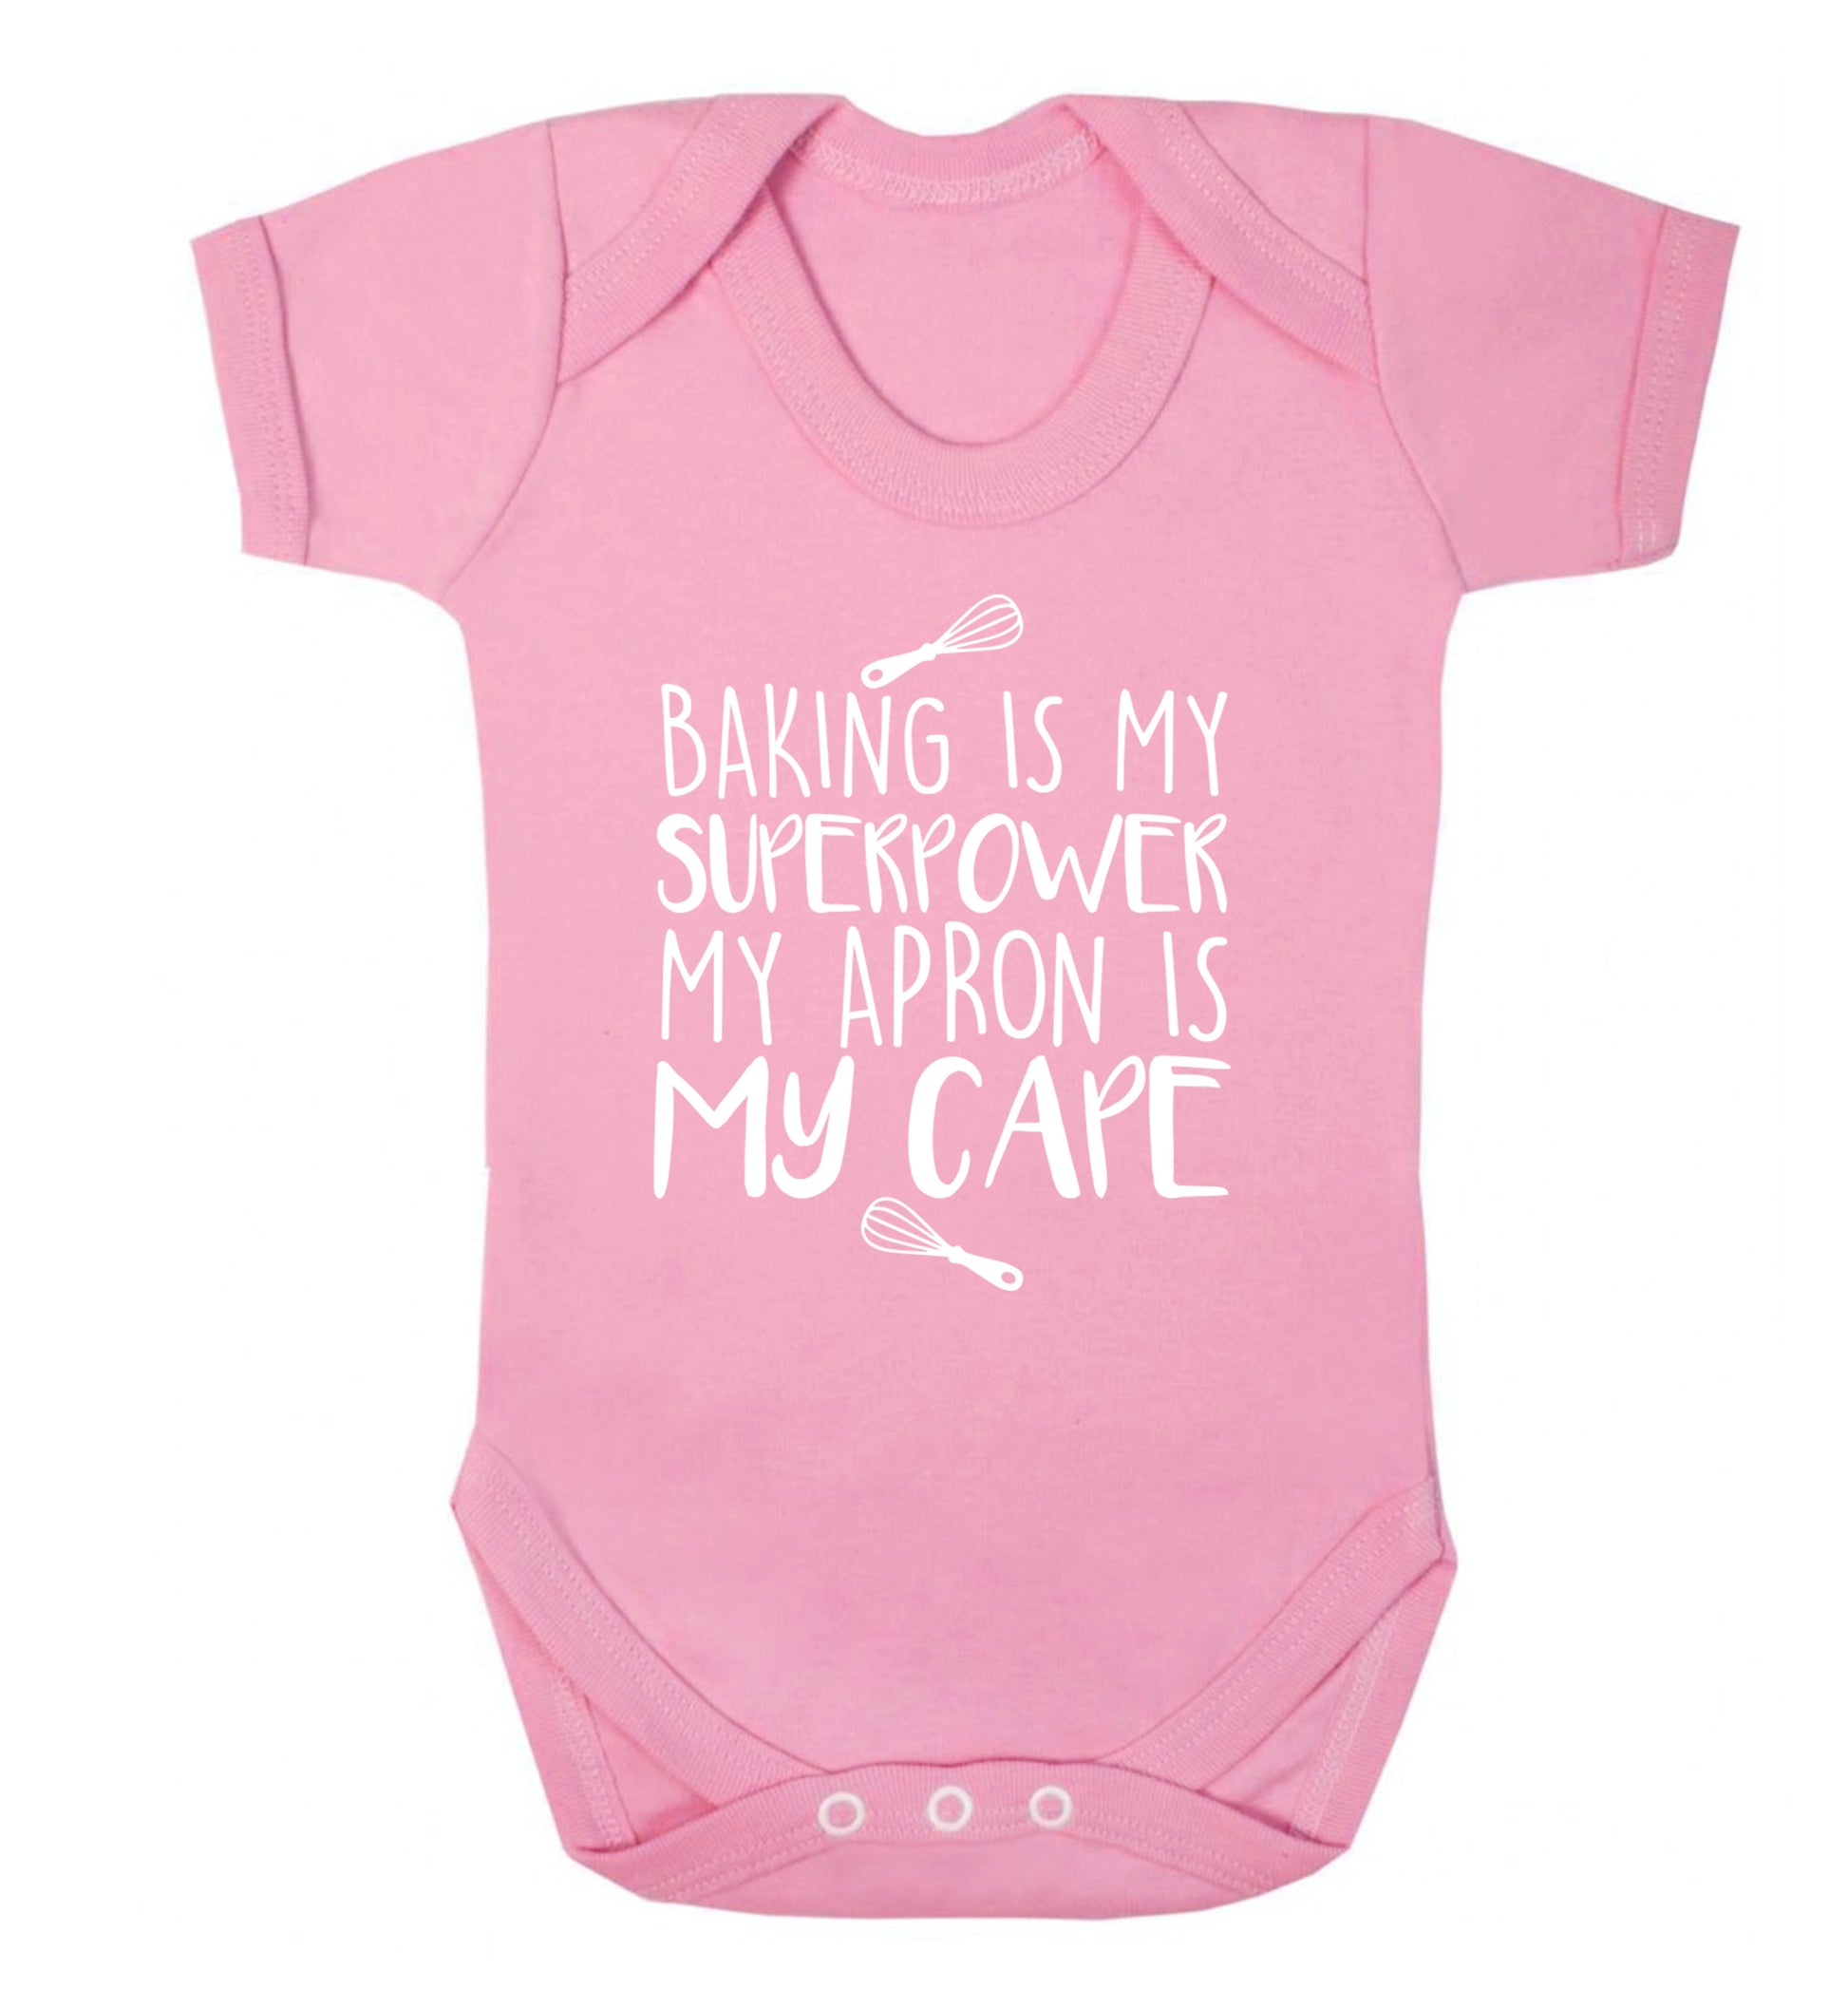 Baking is my superpower my apron is my cape Baby Vest pale pink 18-24 months